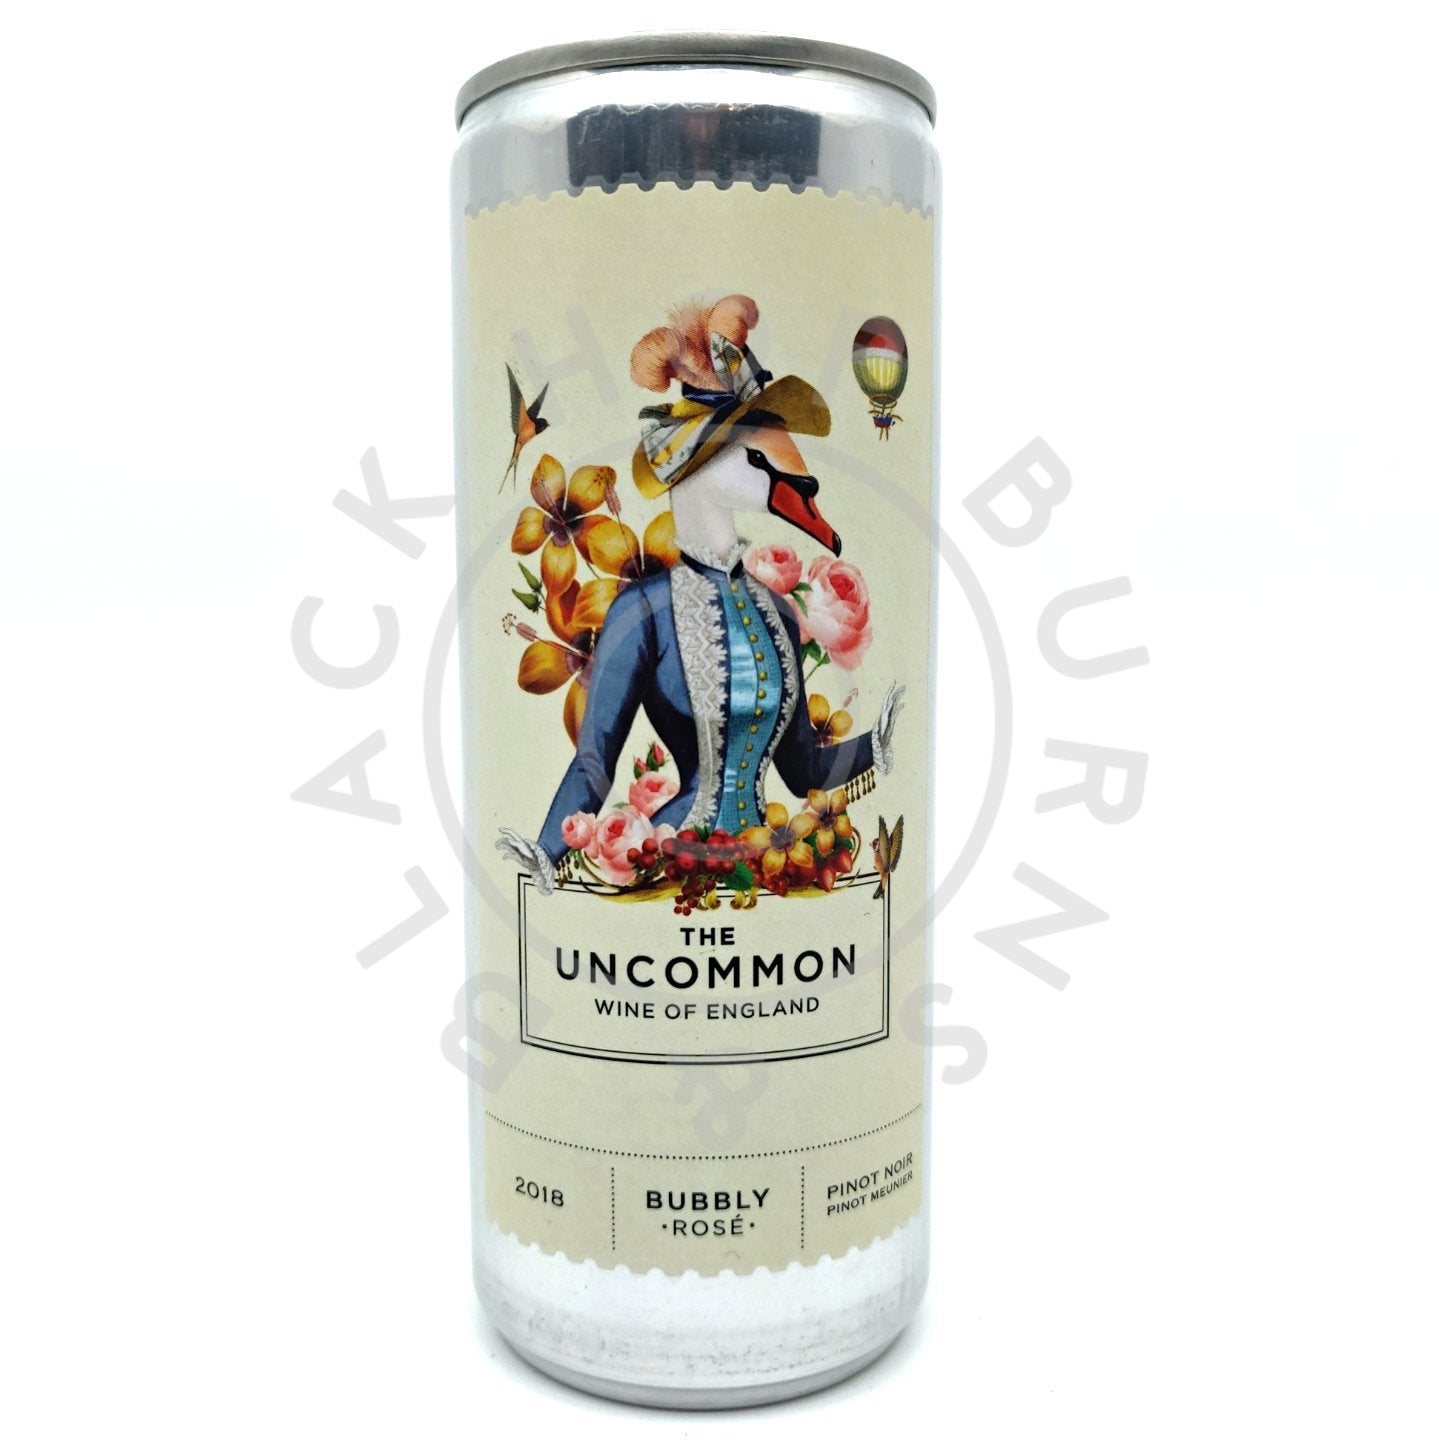 The Uncommon English Bubbly Rose Wine 2019 11.5% (250ml can)-Hop Burns & Black